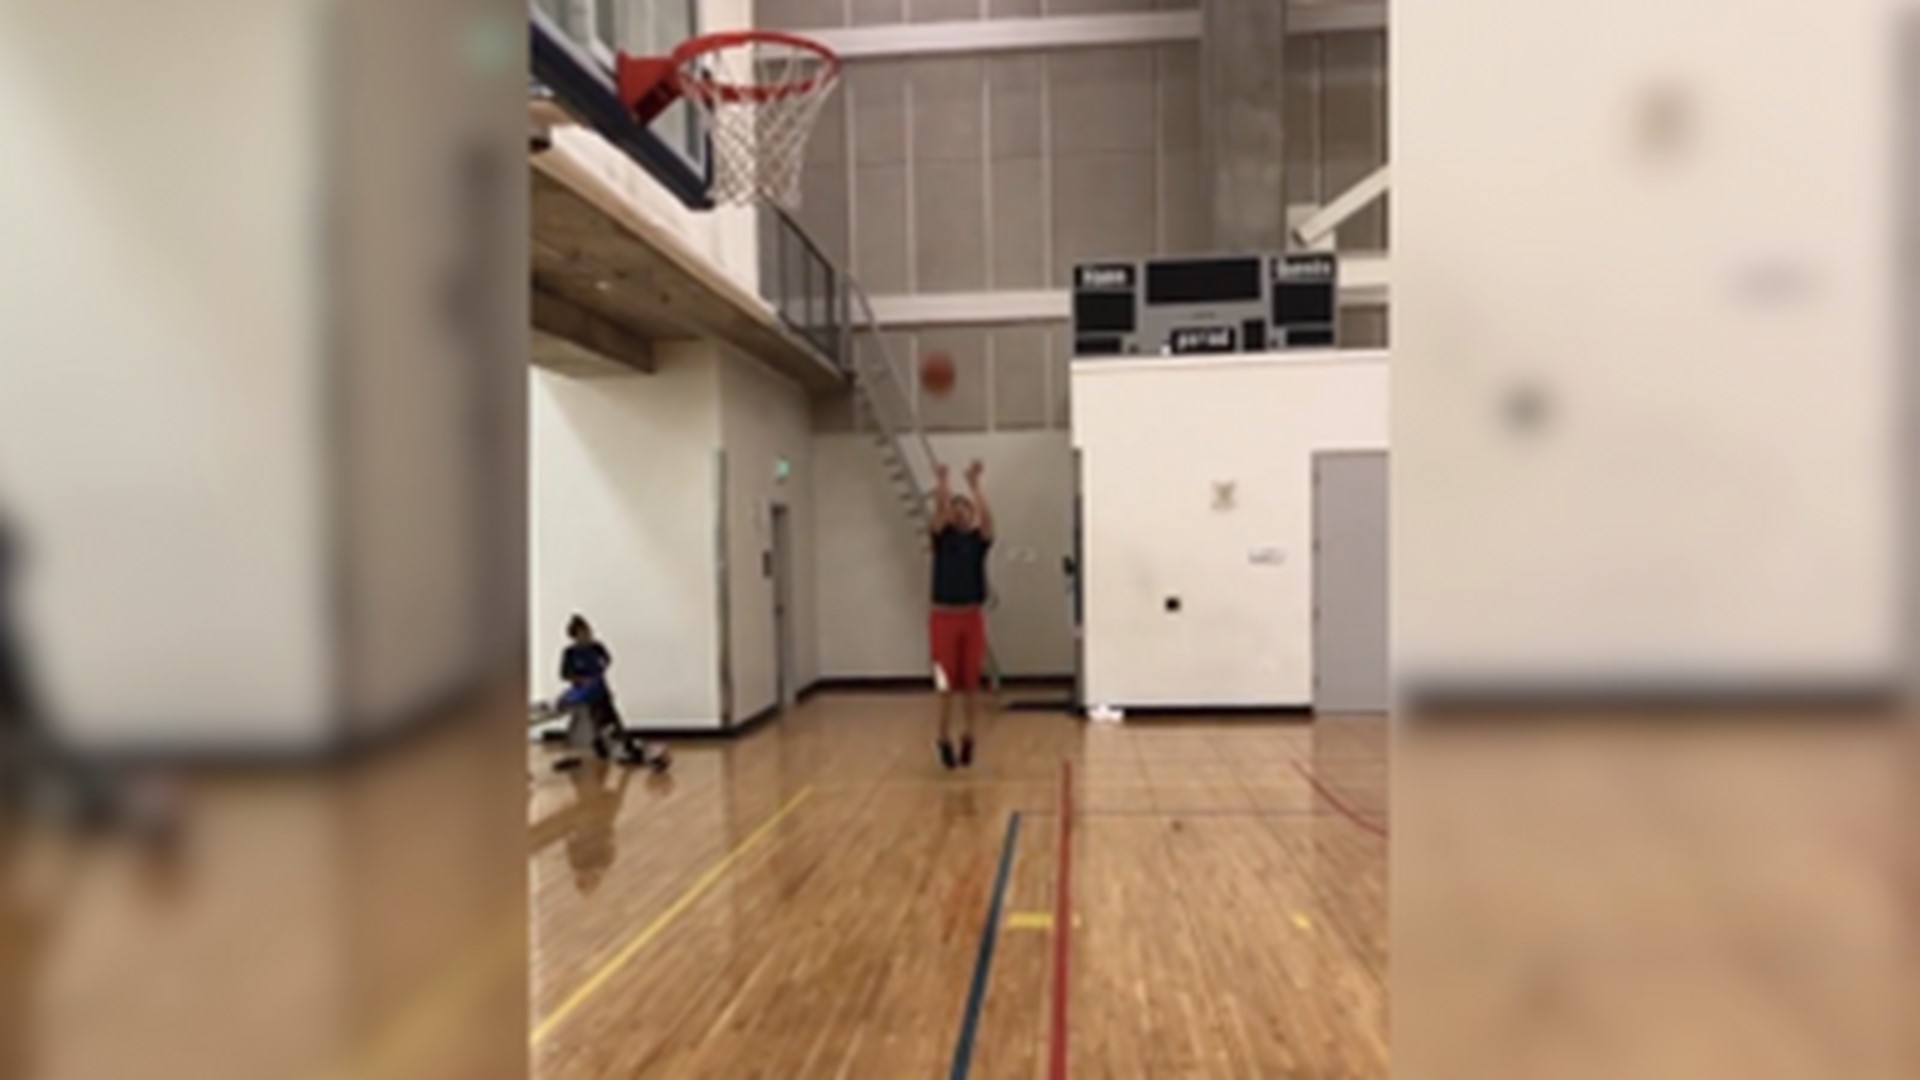 While taking a break from debate prep, Democratic candidate Andrew Yang played basketball and boasted he could 'school' President Trump on the hardwood. Veuer's Justin Kircher has more.